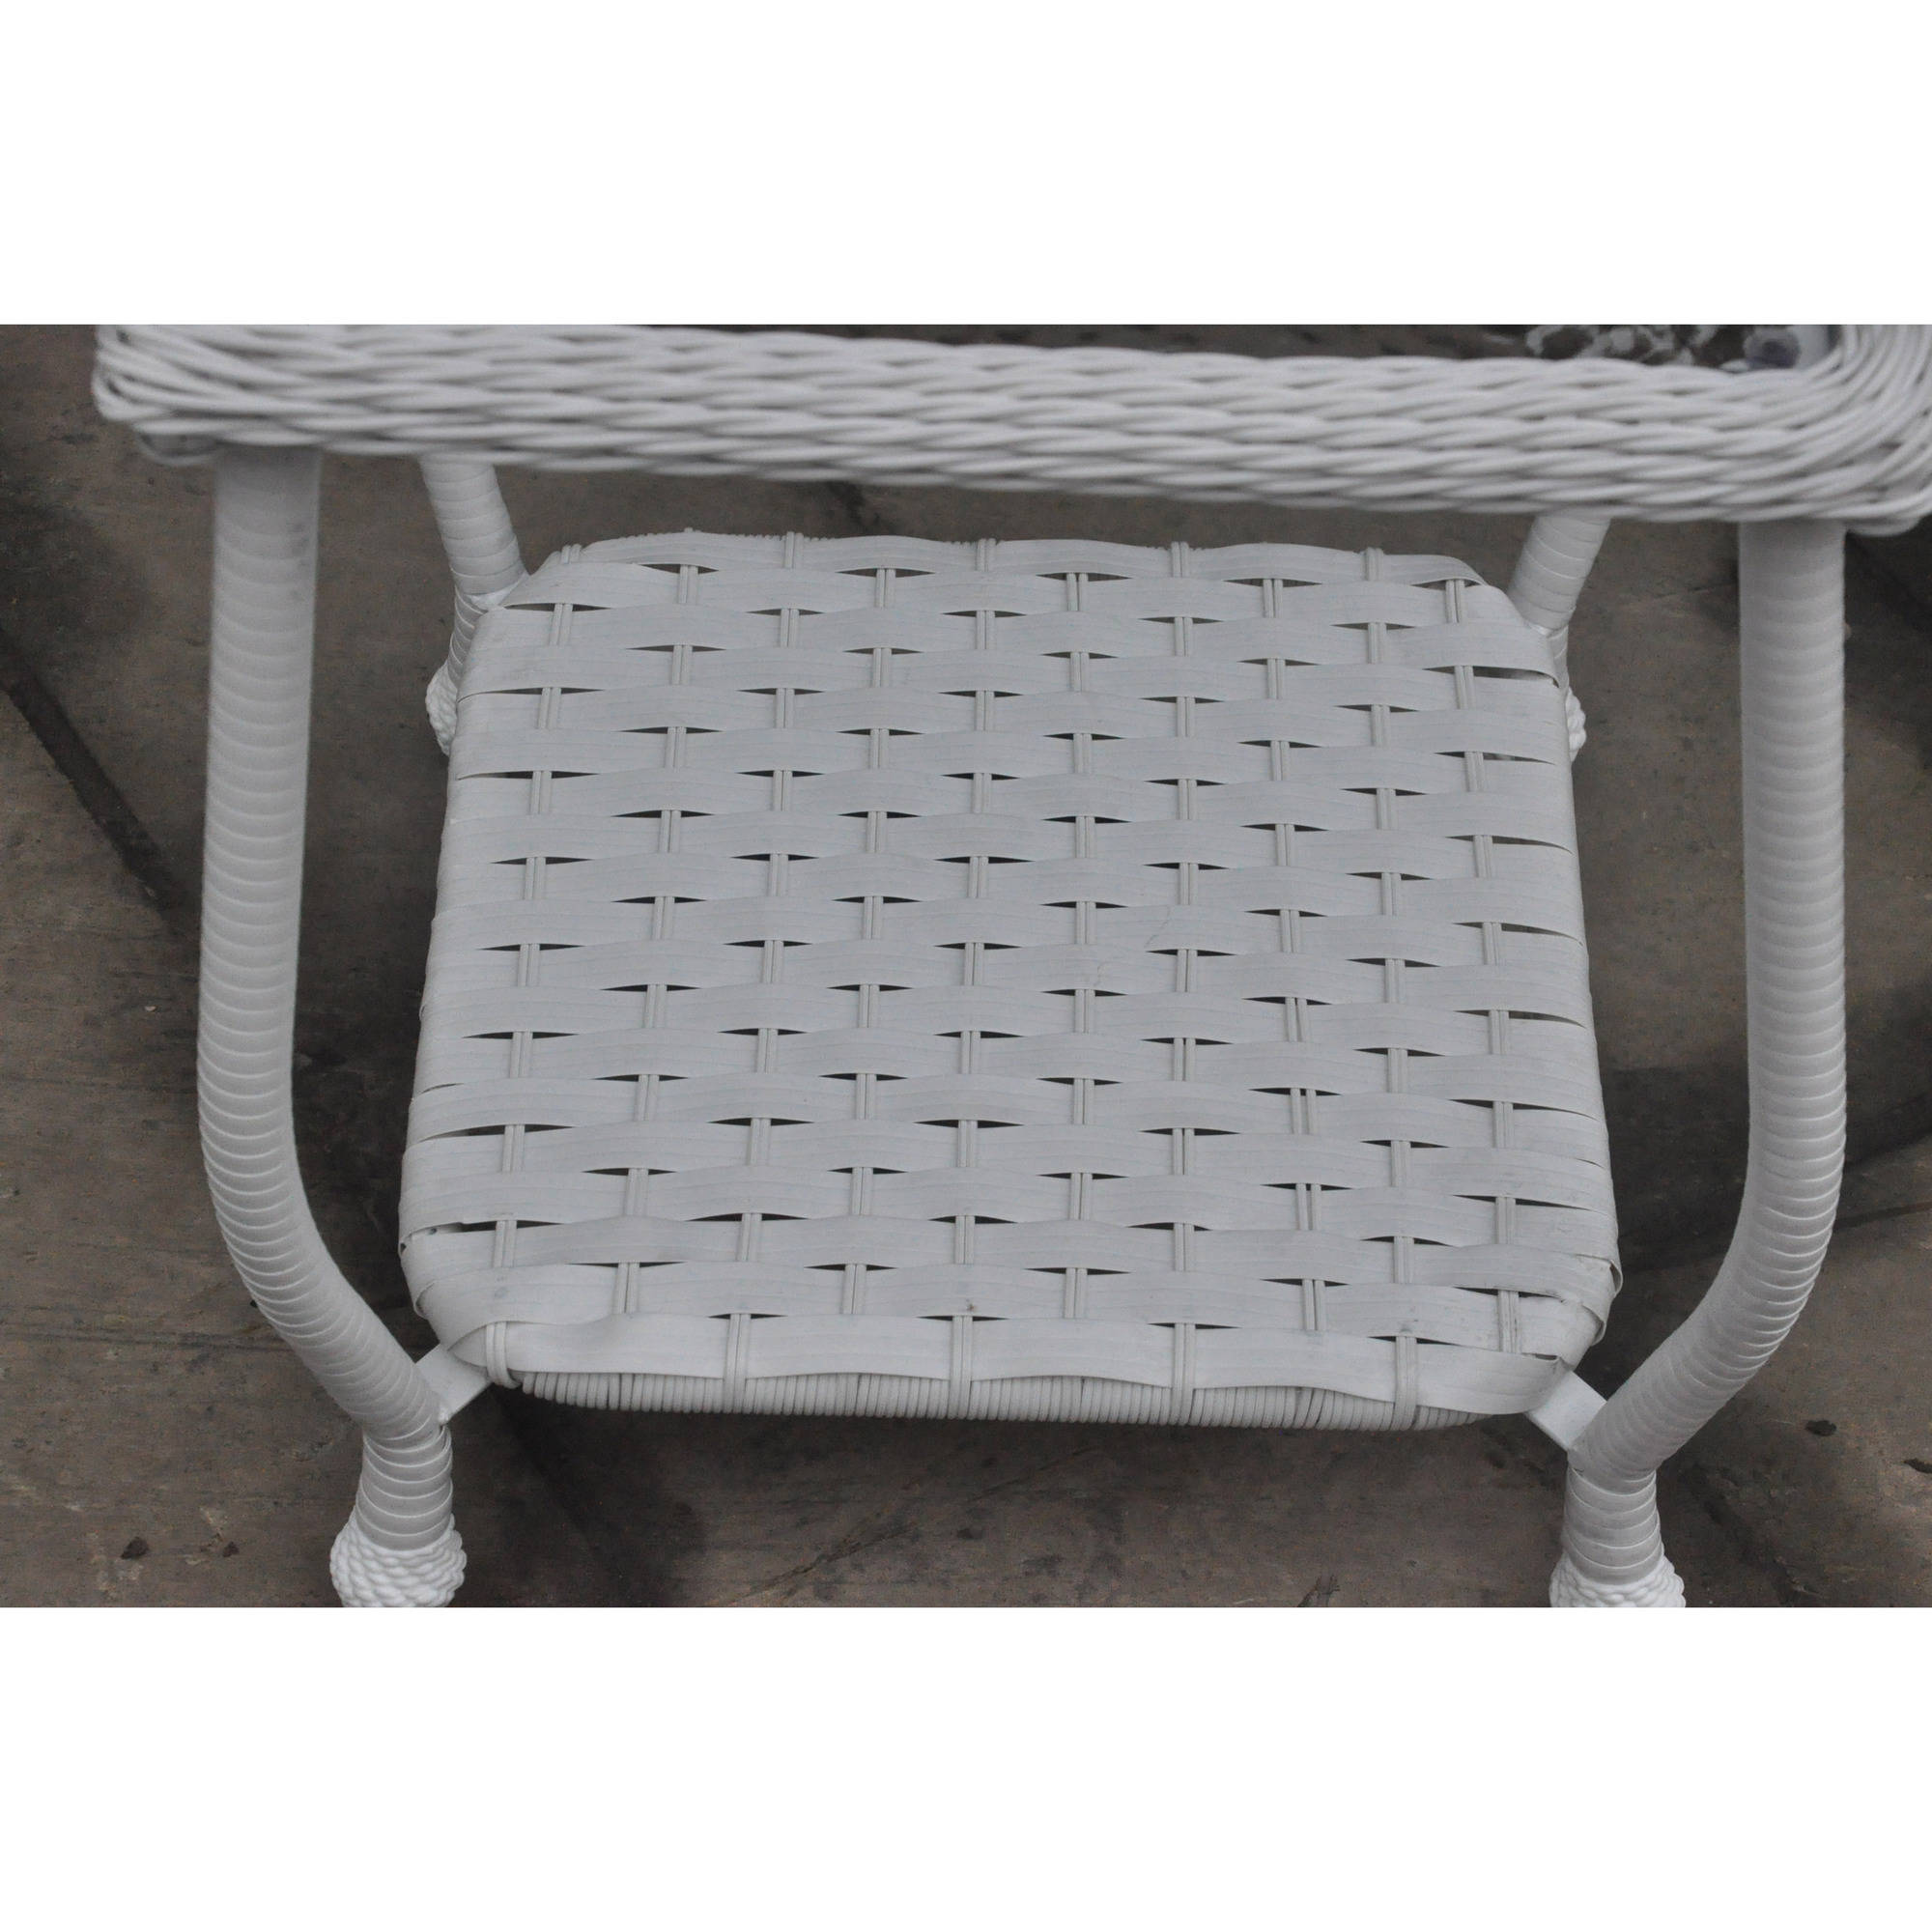 Mainstays Wicker Side Table, White - image 4 of 4